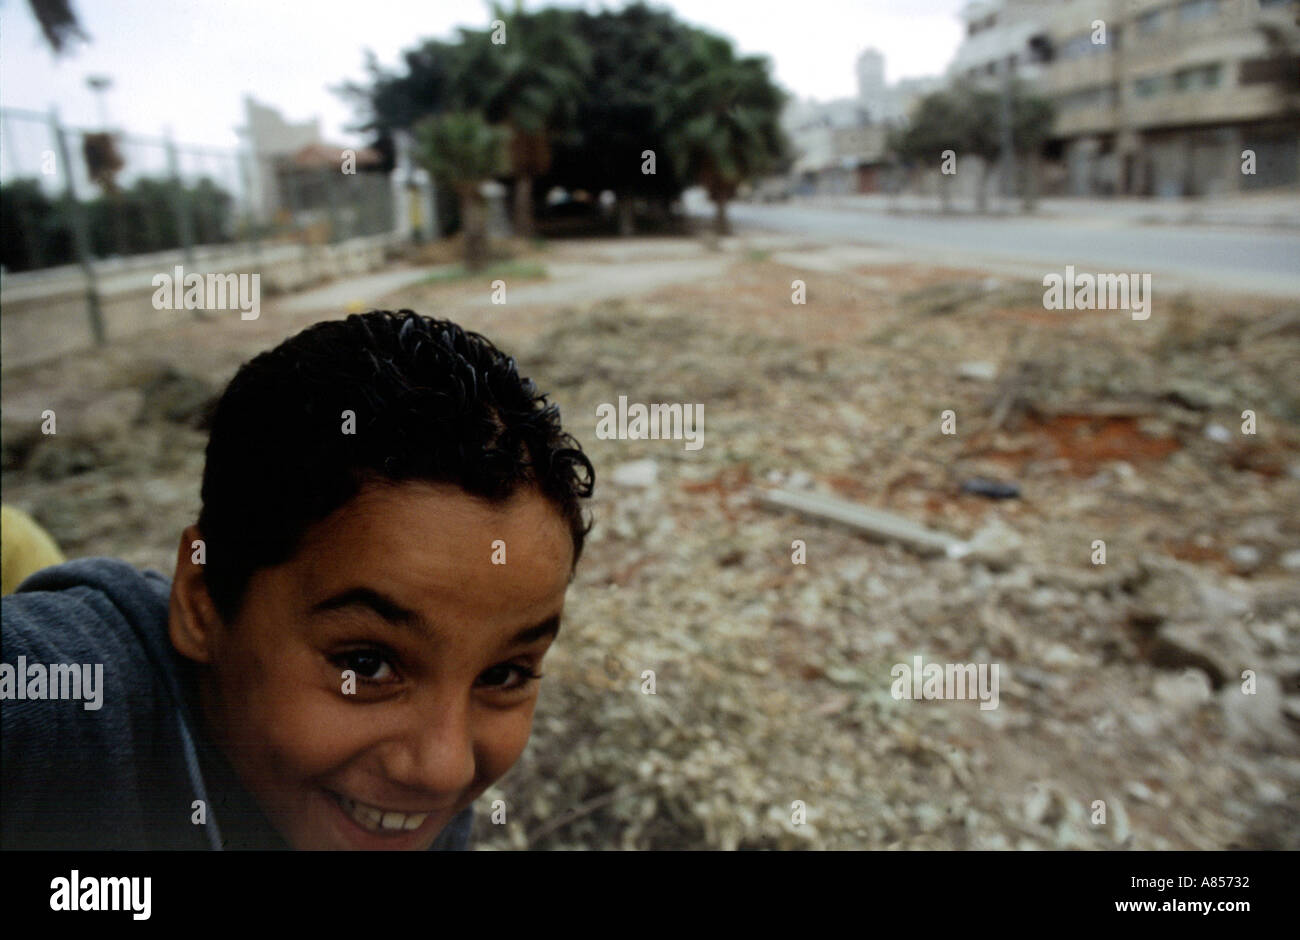 A young boy escapes the aim of an Israeli sniper Nablus November 2002  Stock Photo